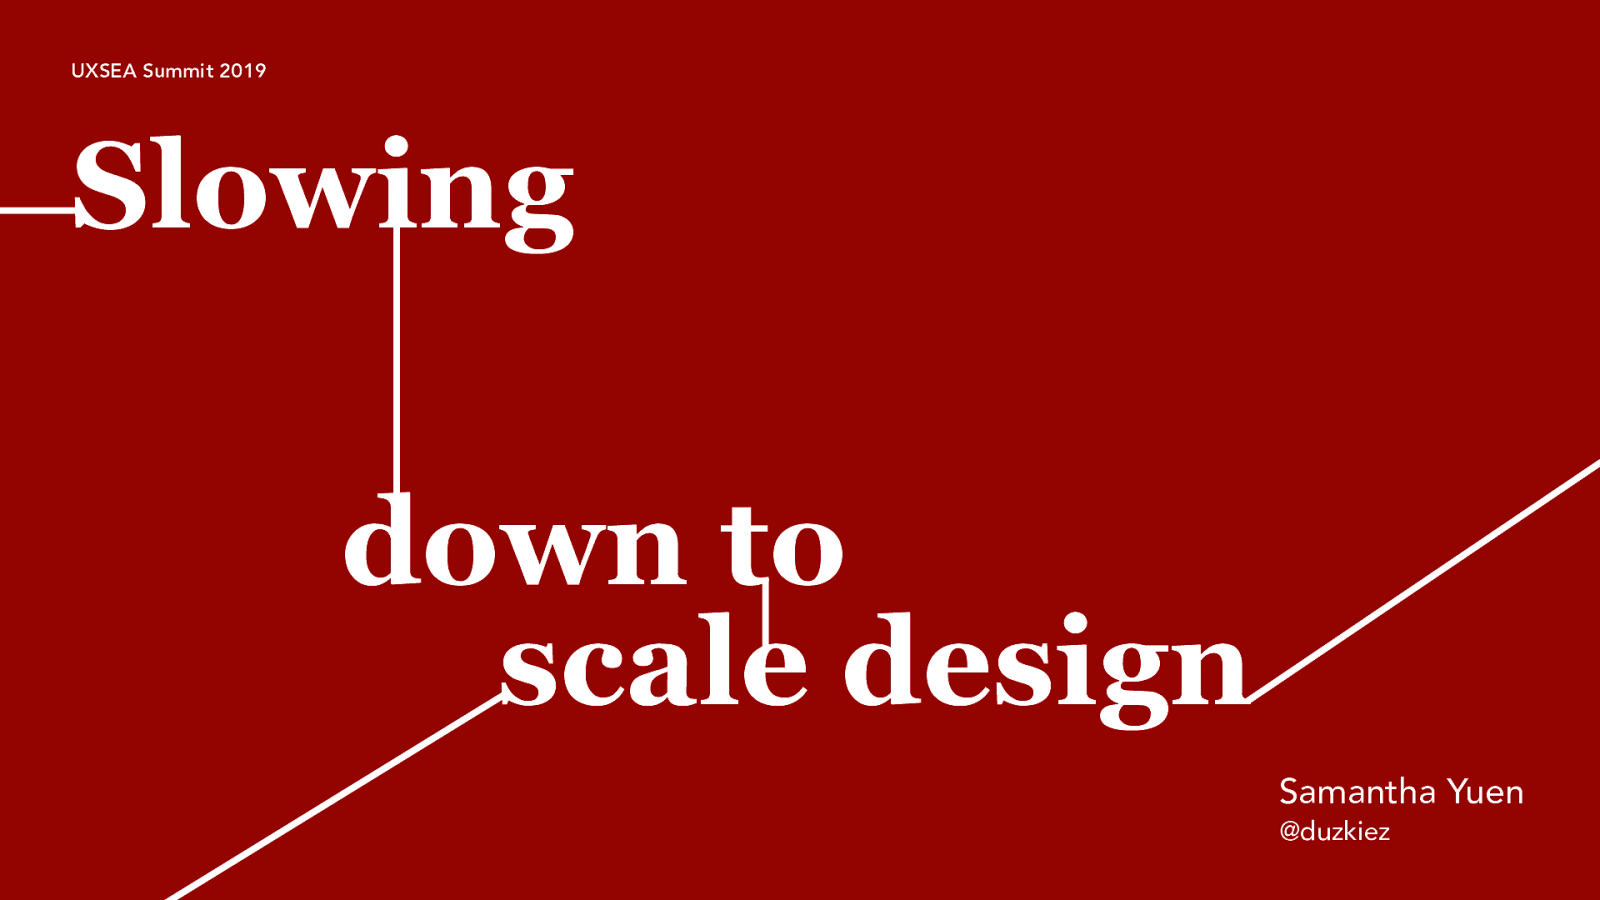 Slowing down to scale design